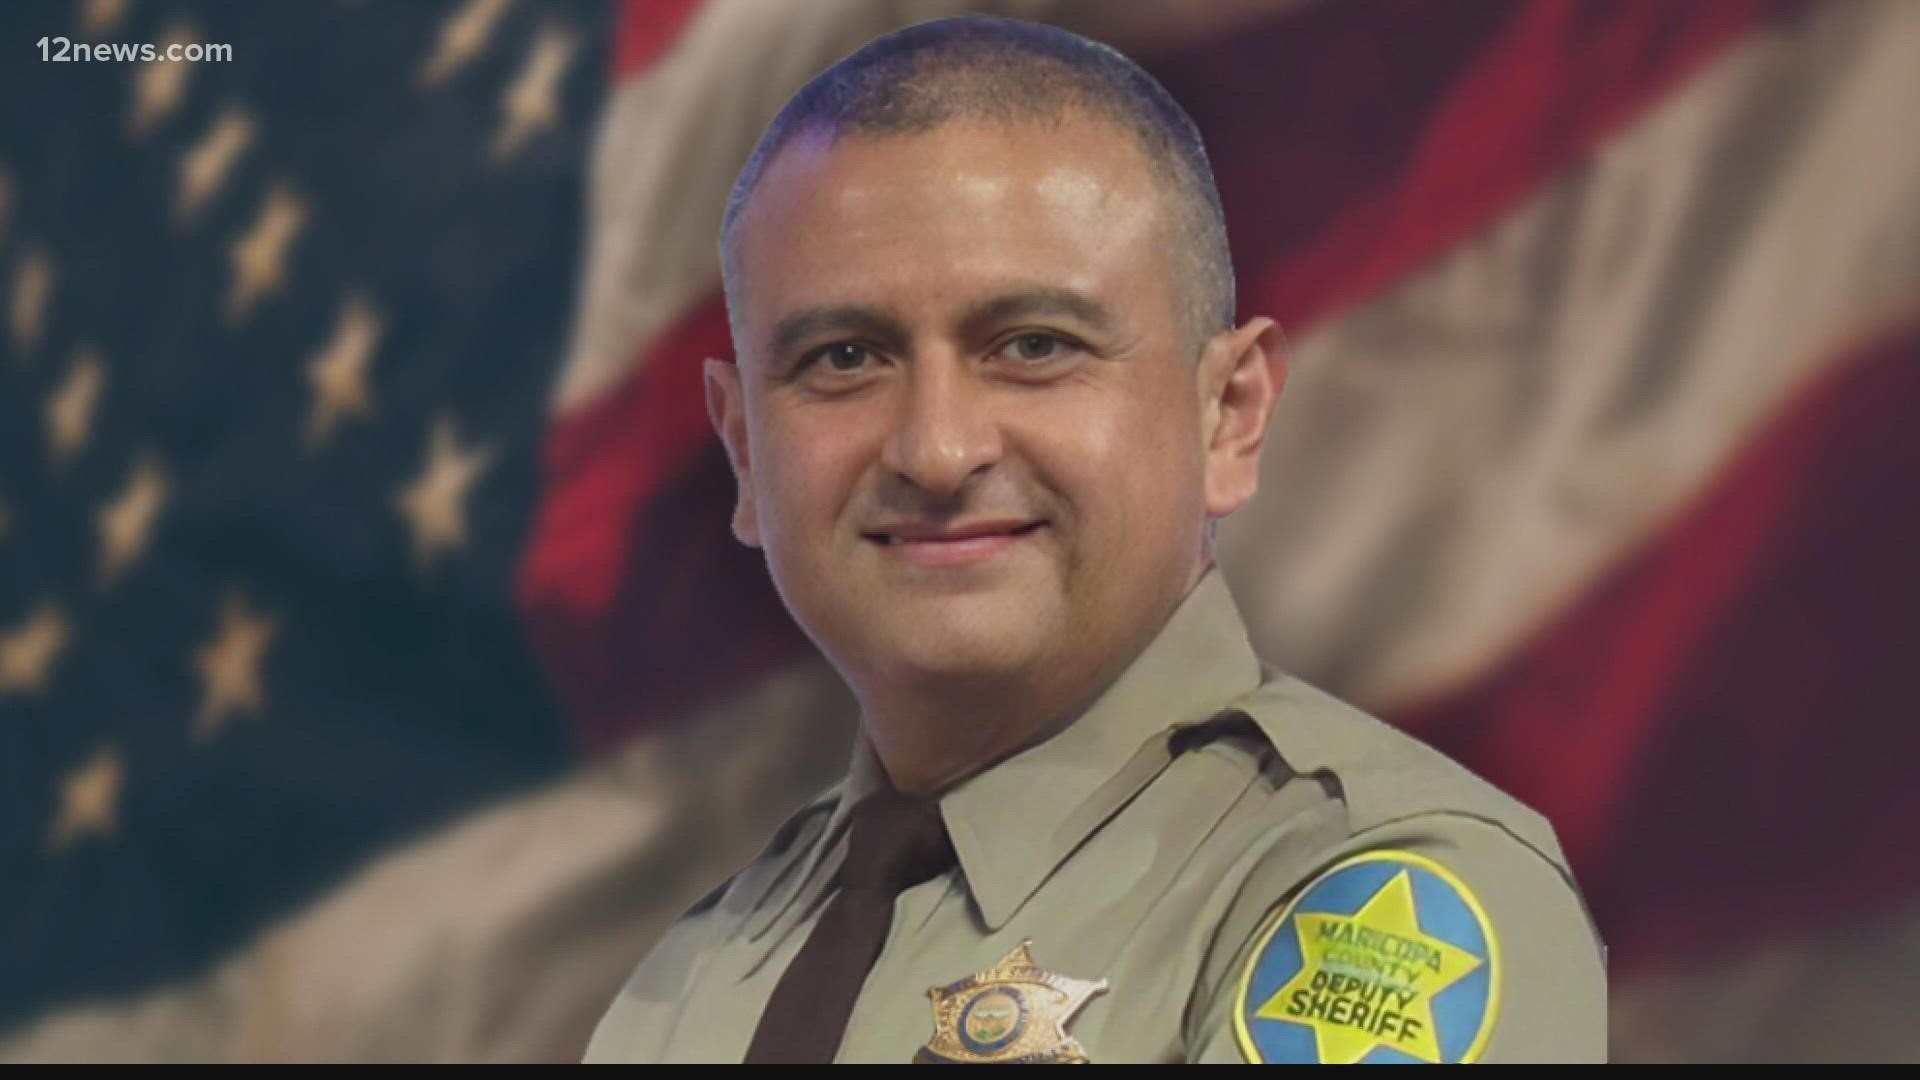 Fallen Maricopa County Deputy Juan 'Johnny' Ruiz was remembered by family, friends and colleagues. They paid loving tribute to a man devoted to serving others.